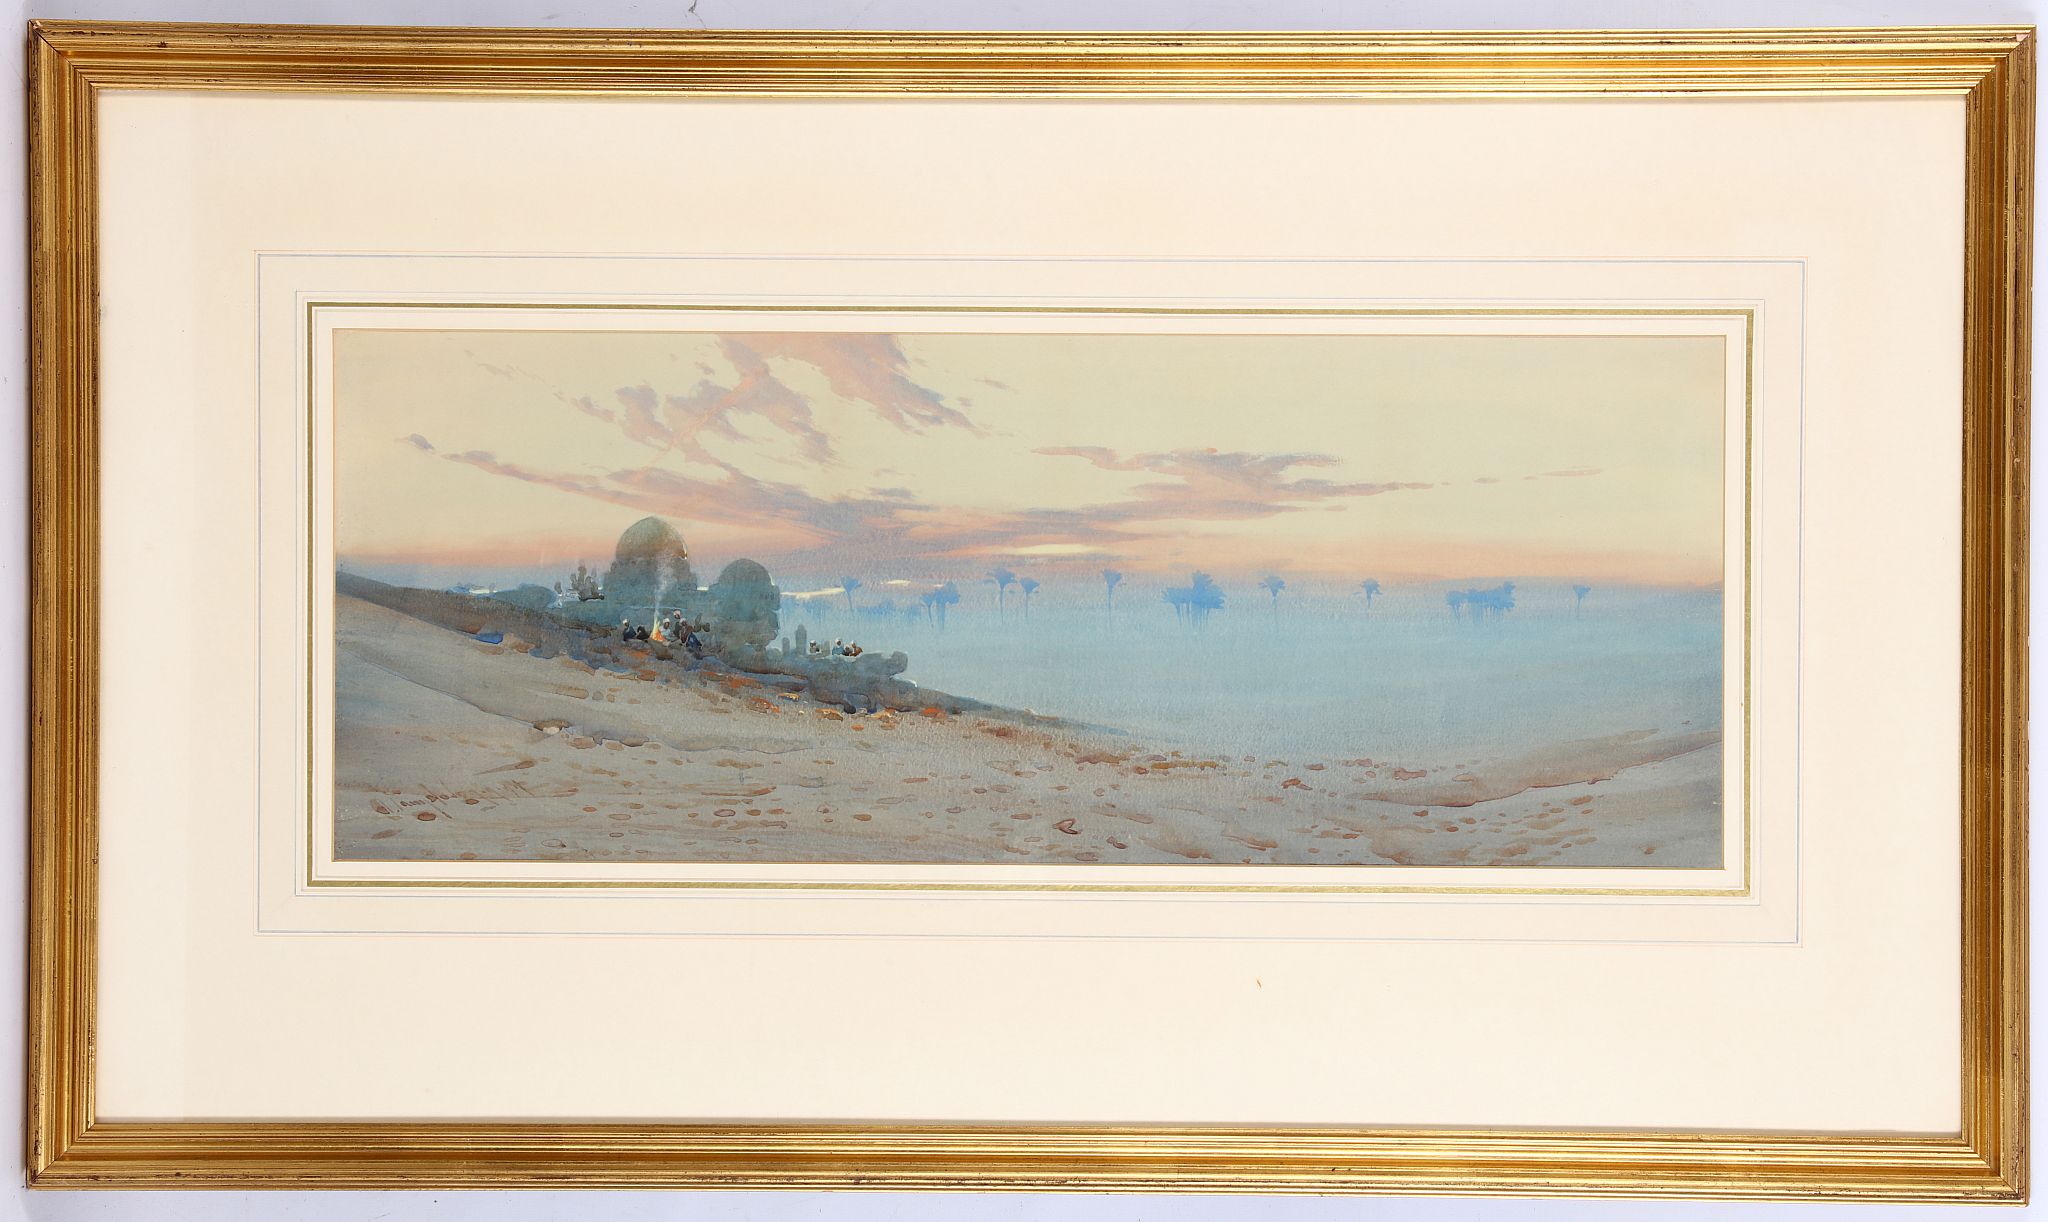 Augustus Osborne Lamplough 1877-1930, 'Sunset on the Nile', watercolour, signed lower left and dated